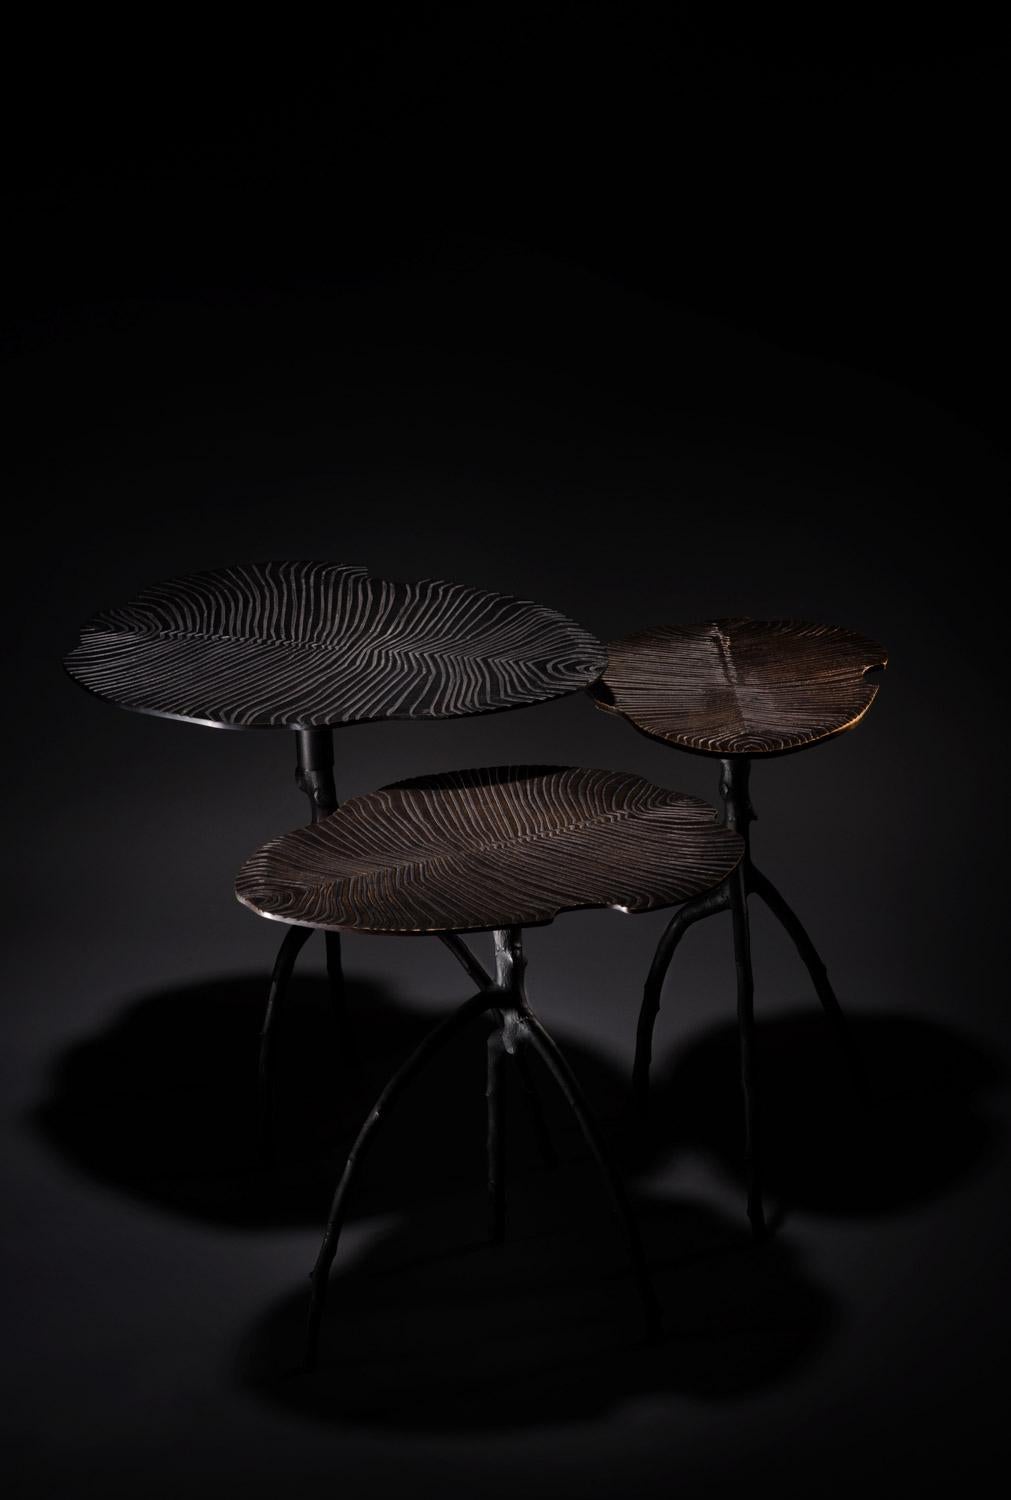 From those three side tables, 560 millions of years are contemplating us. Done in Bronze by a 